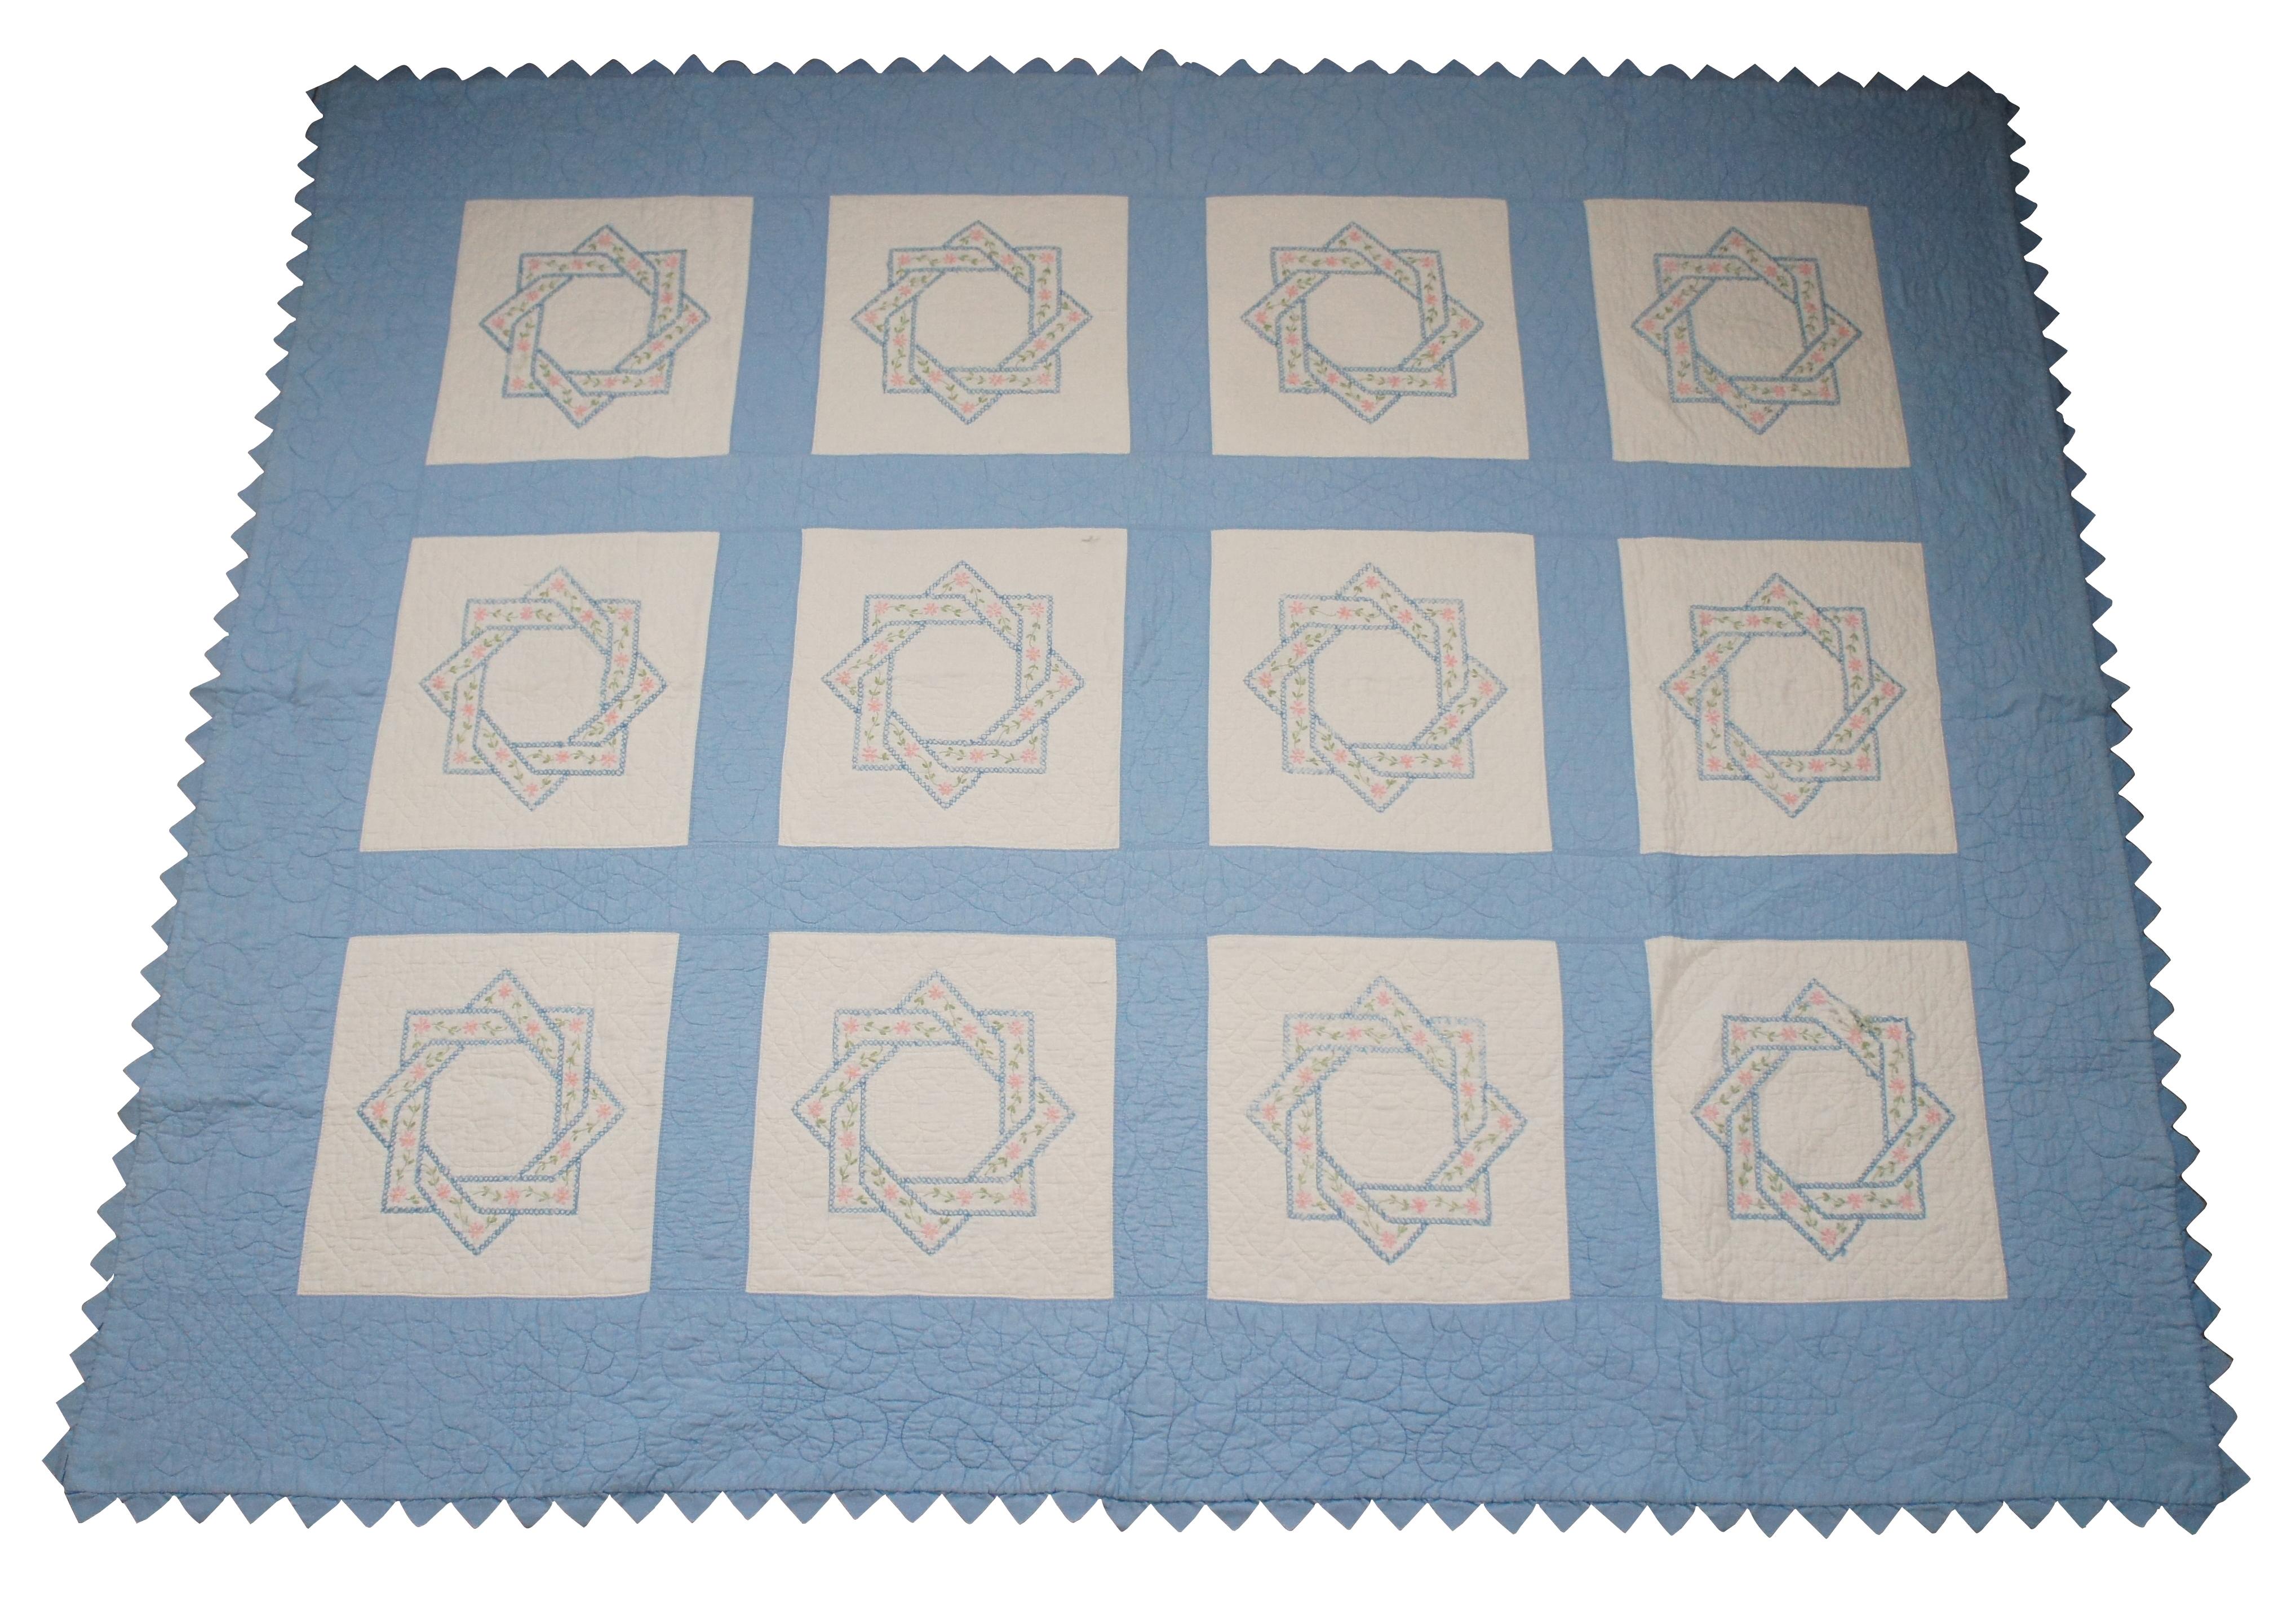 Antique hand stitched blue and white bedspread / blanket / coverlet / quilt with sawtooth border and blocks embroidered with woven interlocked eight pointed stars lined in pink flowers. Measure: 91